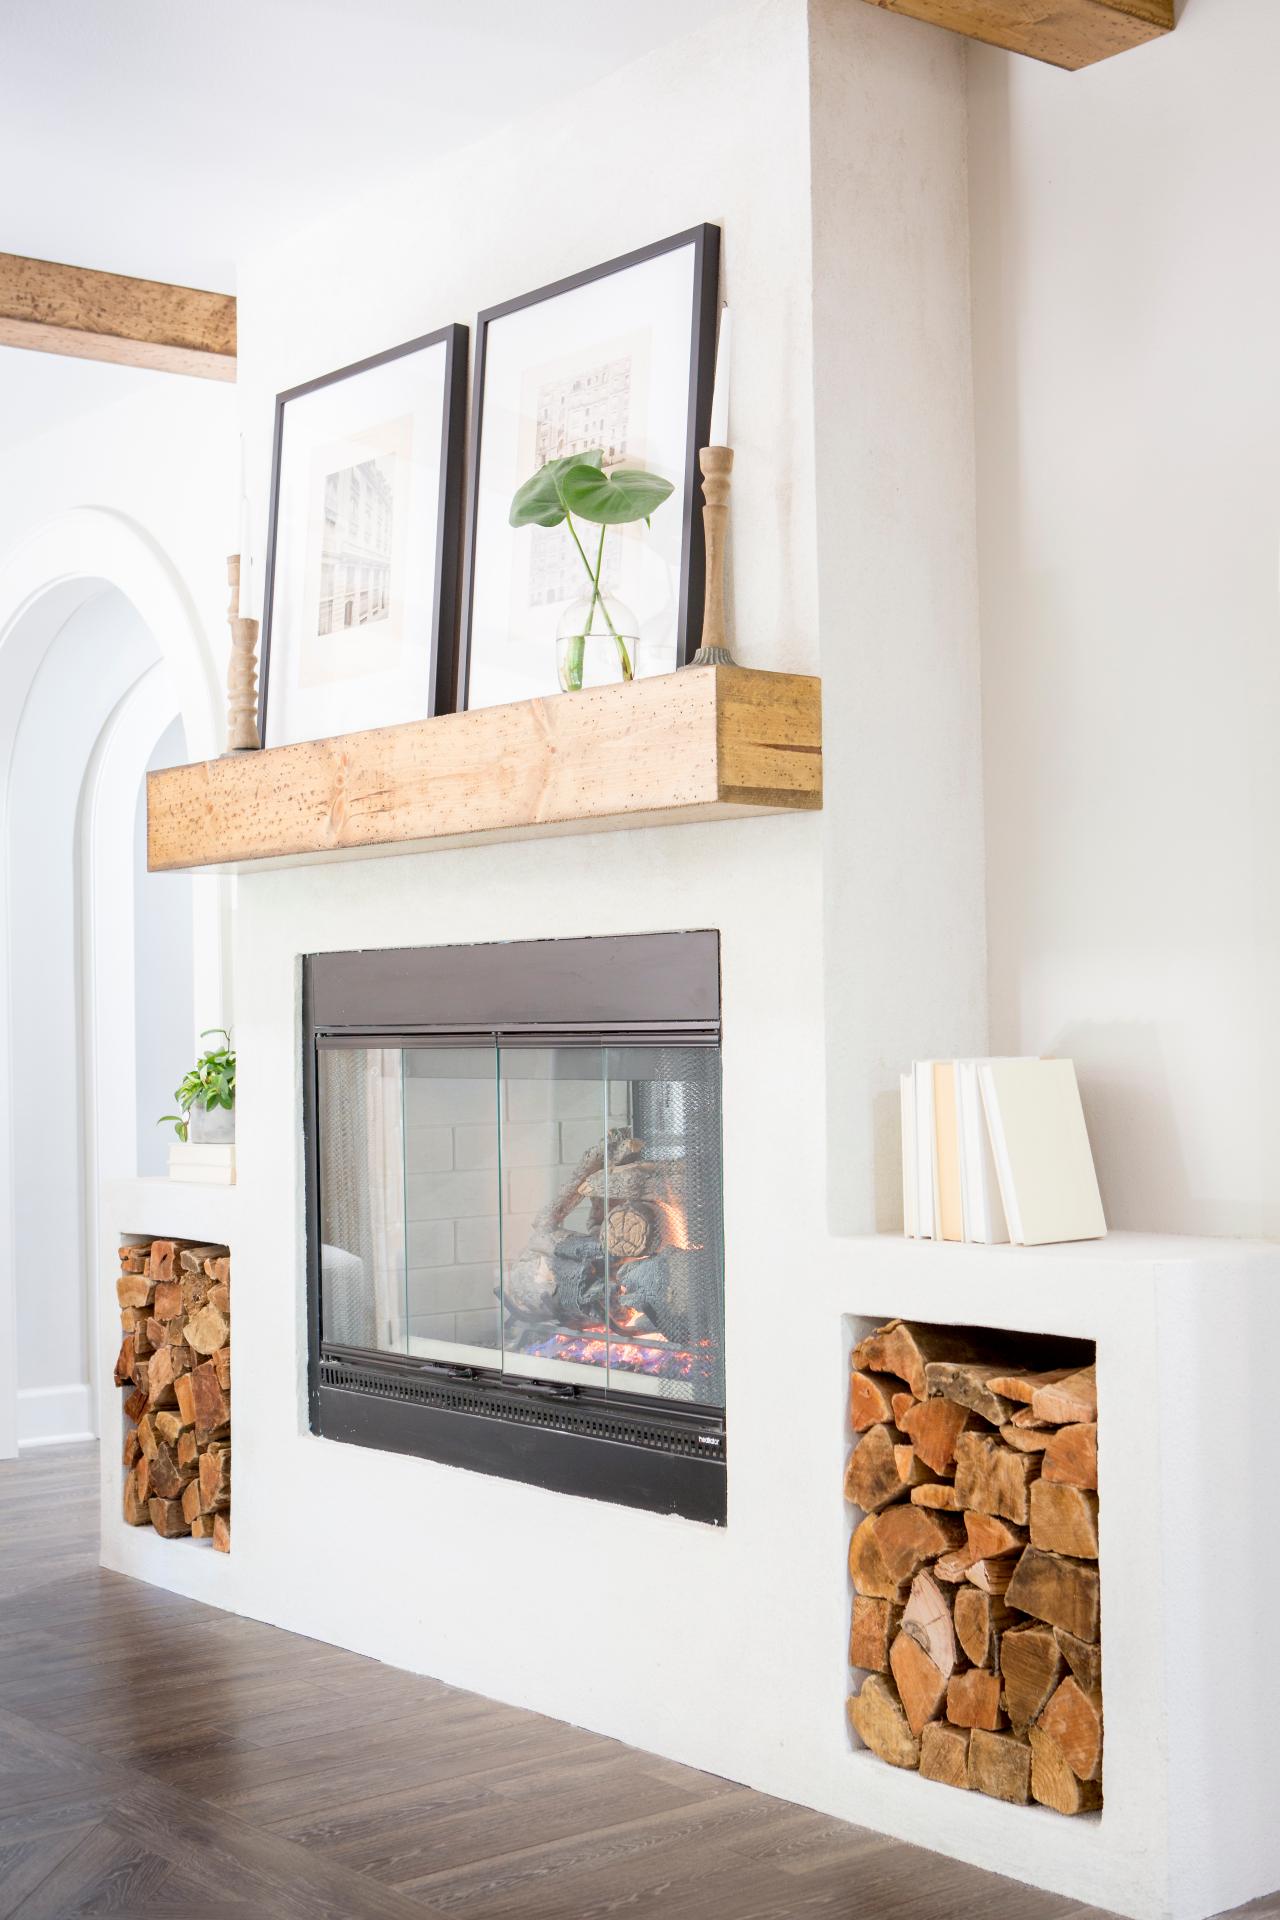 80 Fabulous Fireplace Design Ideas For Any Budget Or Style Hgtv